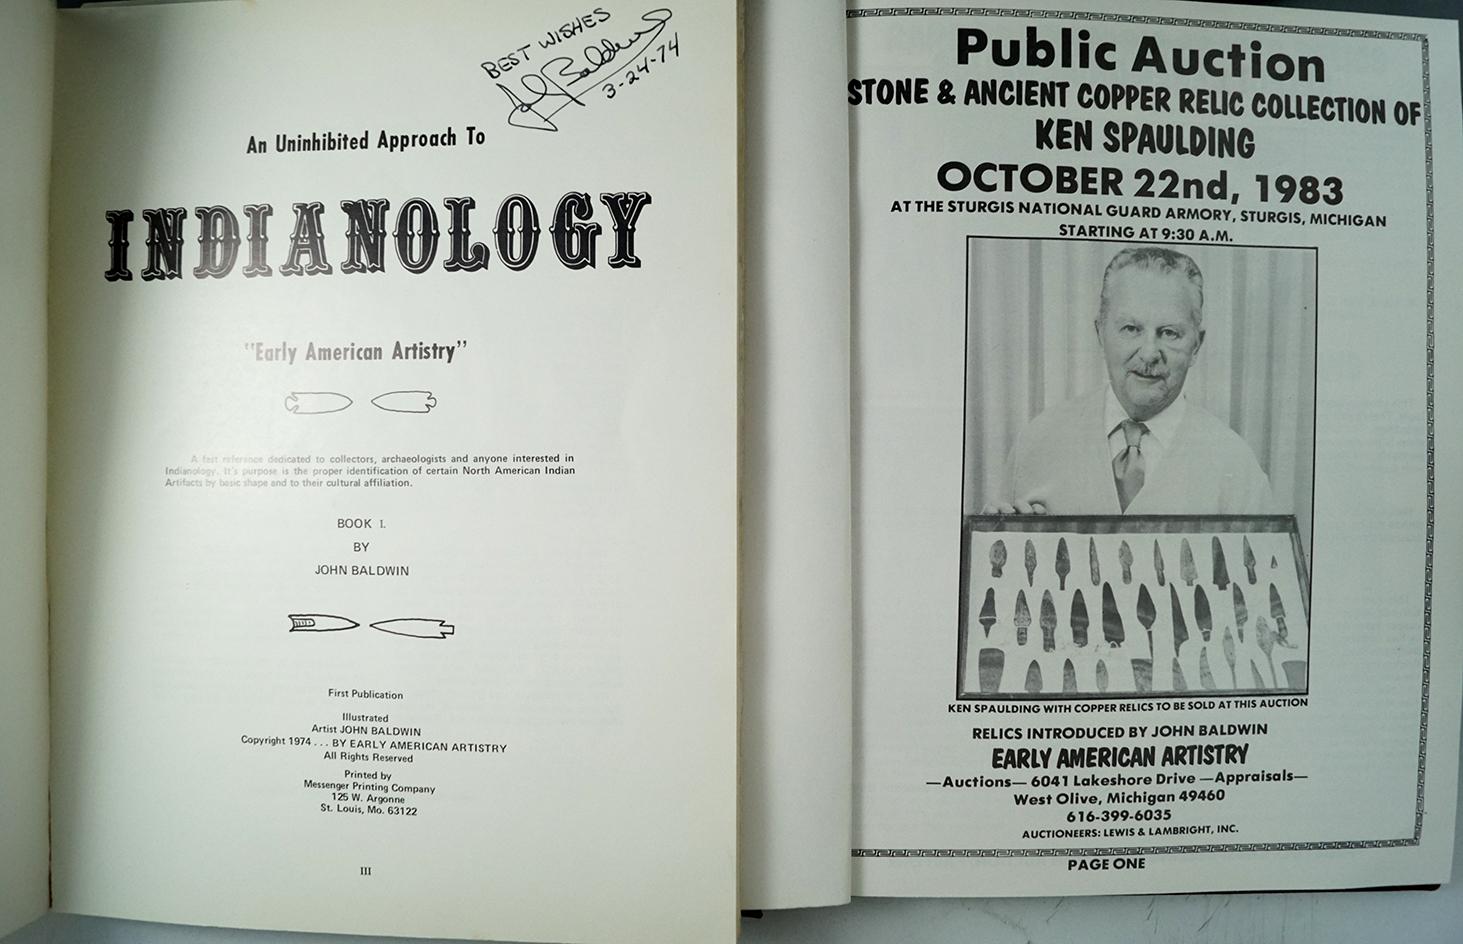 Pair of books by John Baldwin including "An Uninhibited Approach to Indianology Book 1"